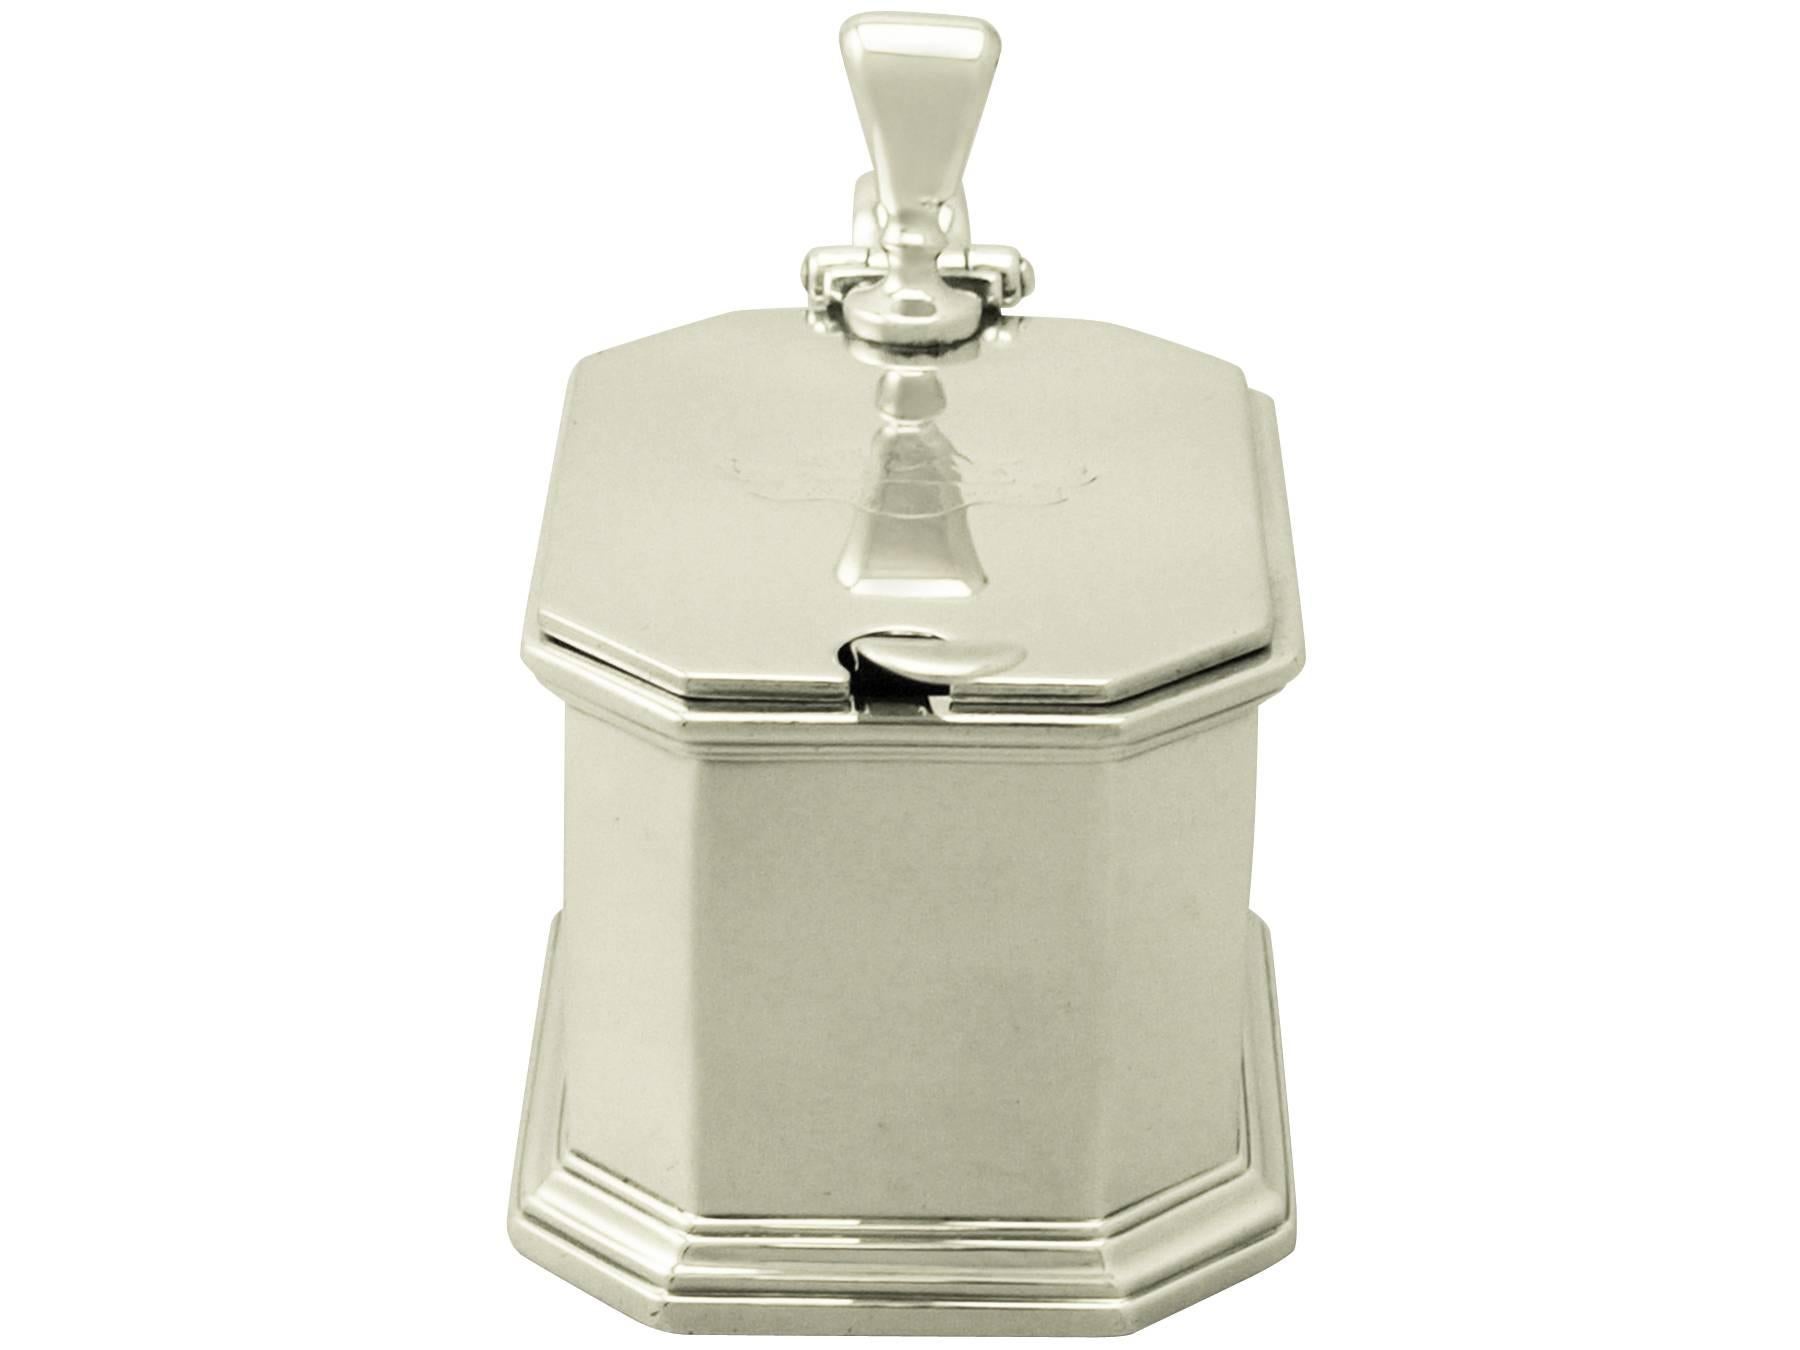 An exceptional, fine and impressive, large antique Edwardian English Britannia Standard silver mustard pot; an addition to our silver cruets/condiments collection.

This fine antique Edwardian Britannia standard silver* mustard pot has a plain